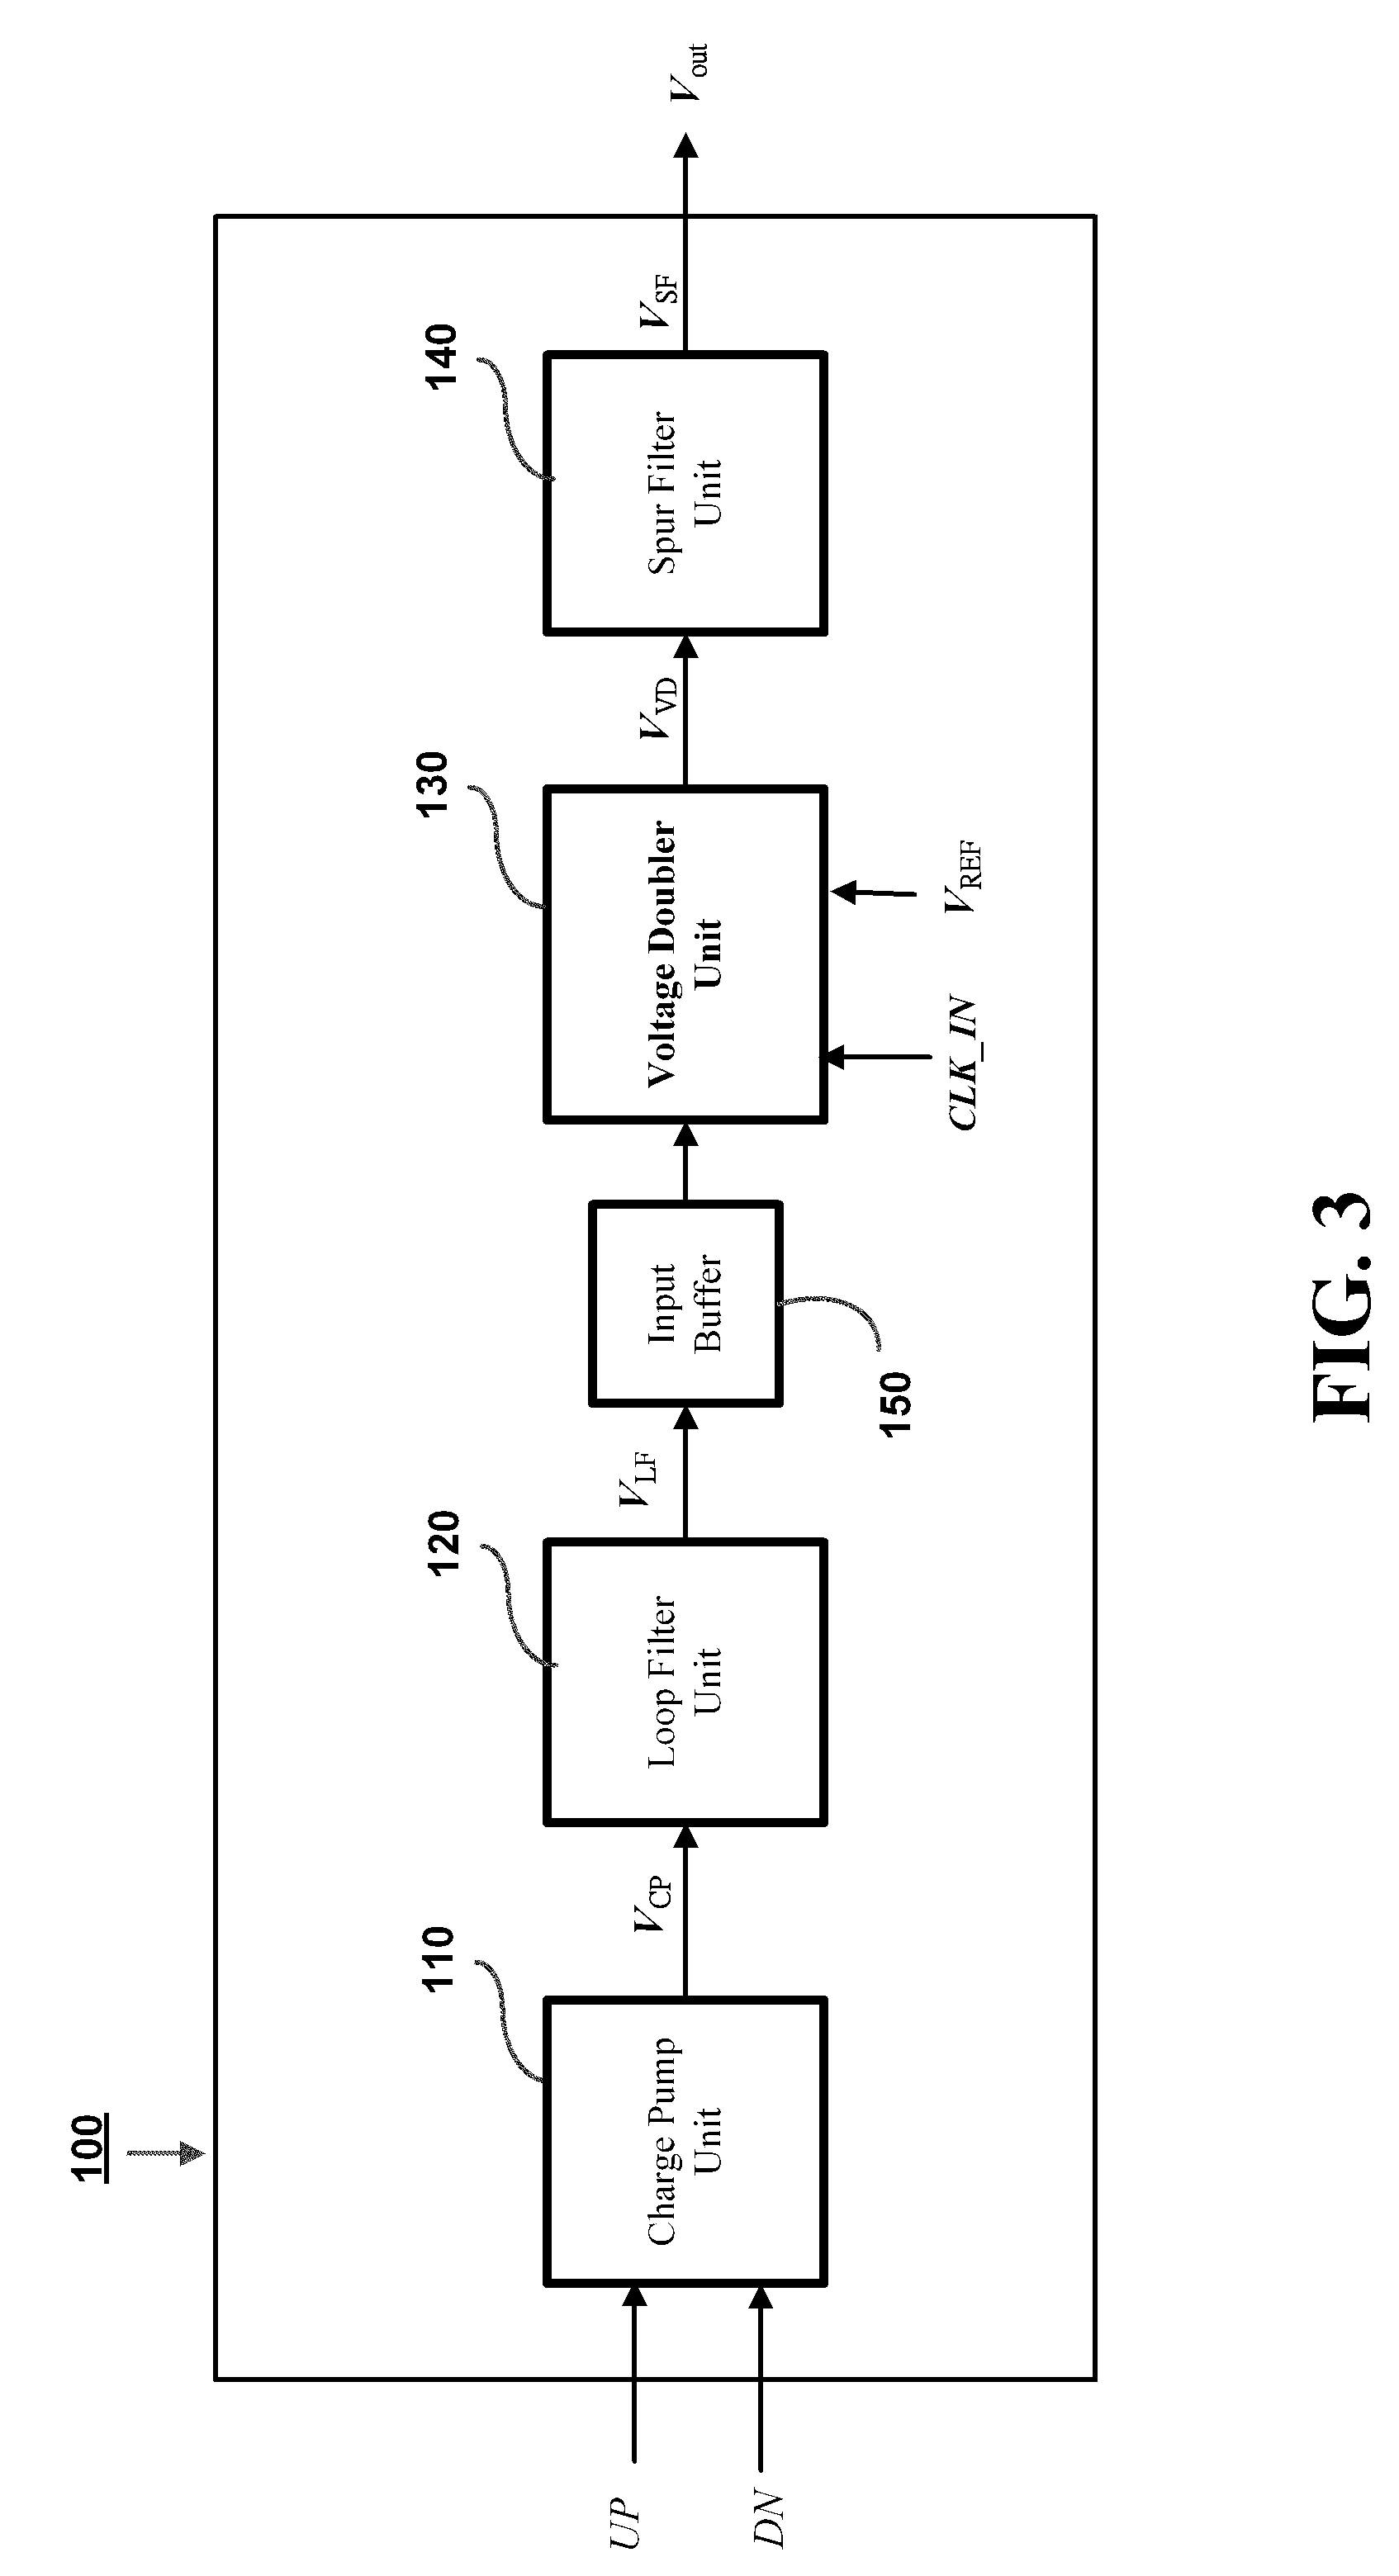 Differential signal driven direct-current voltage generating device